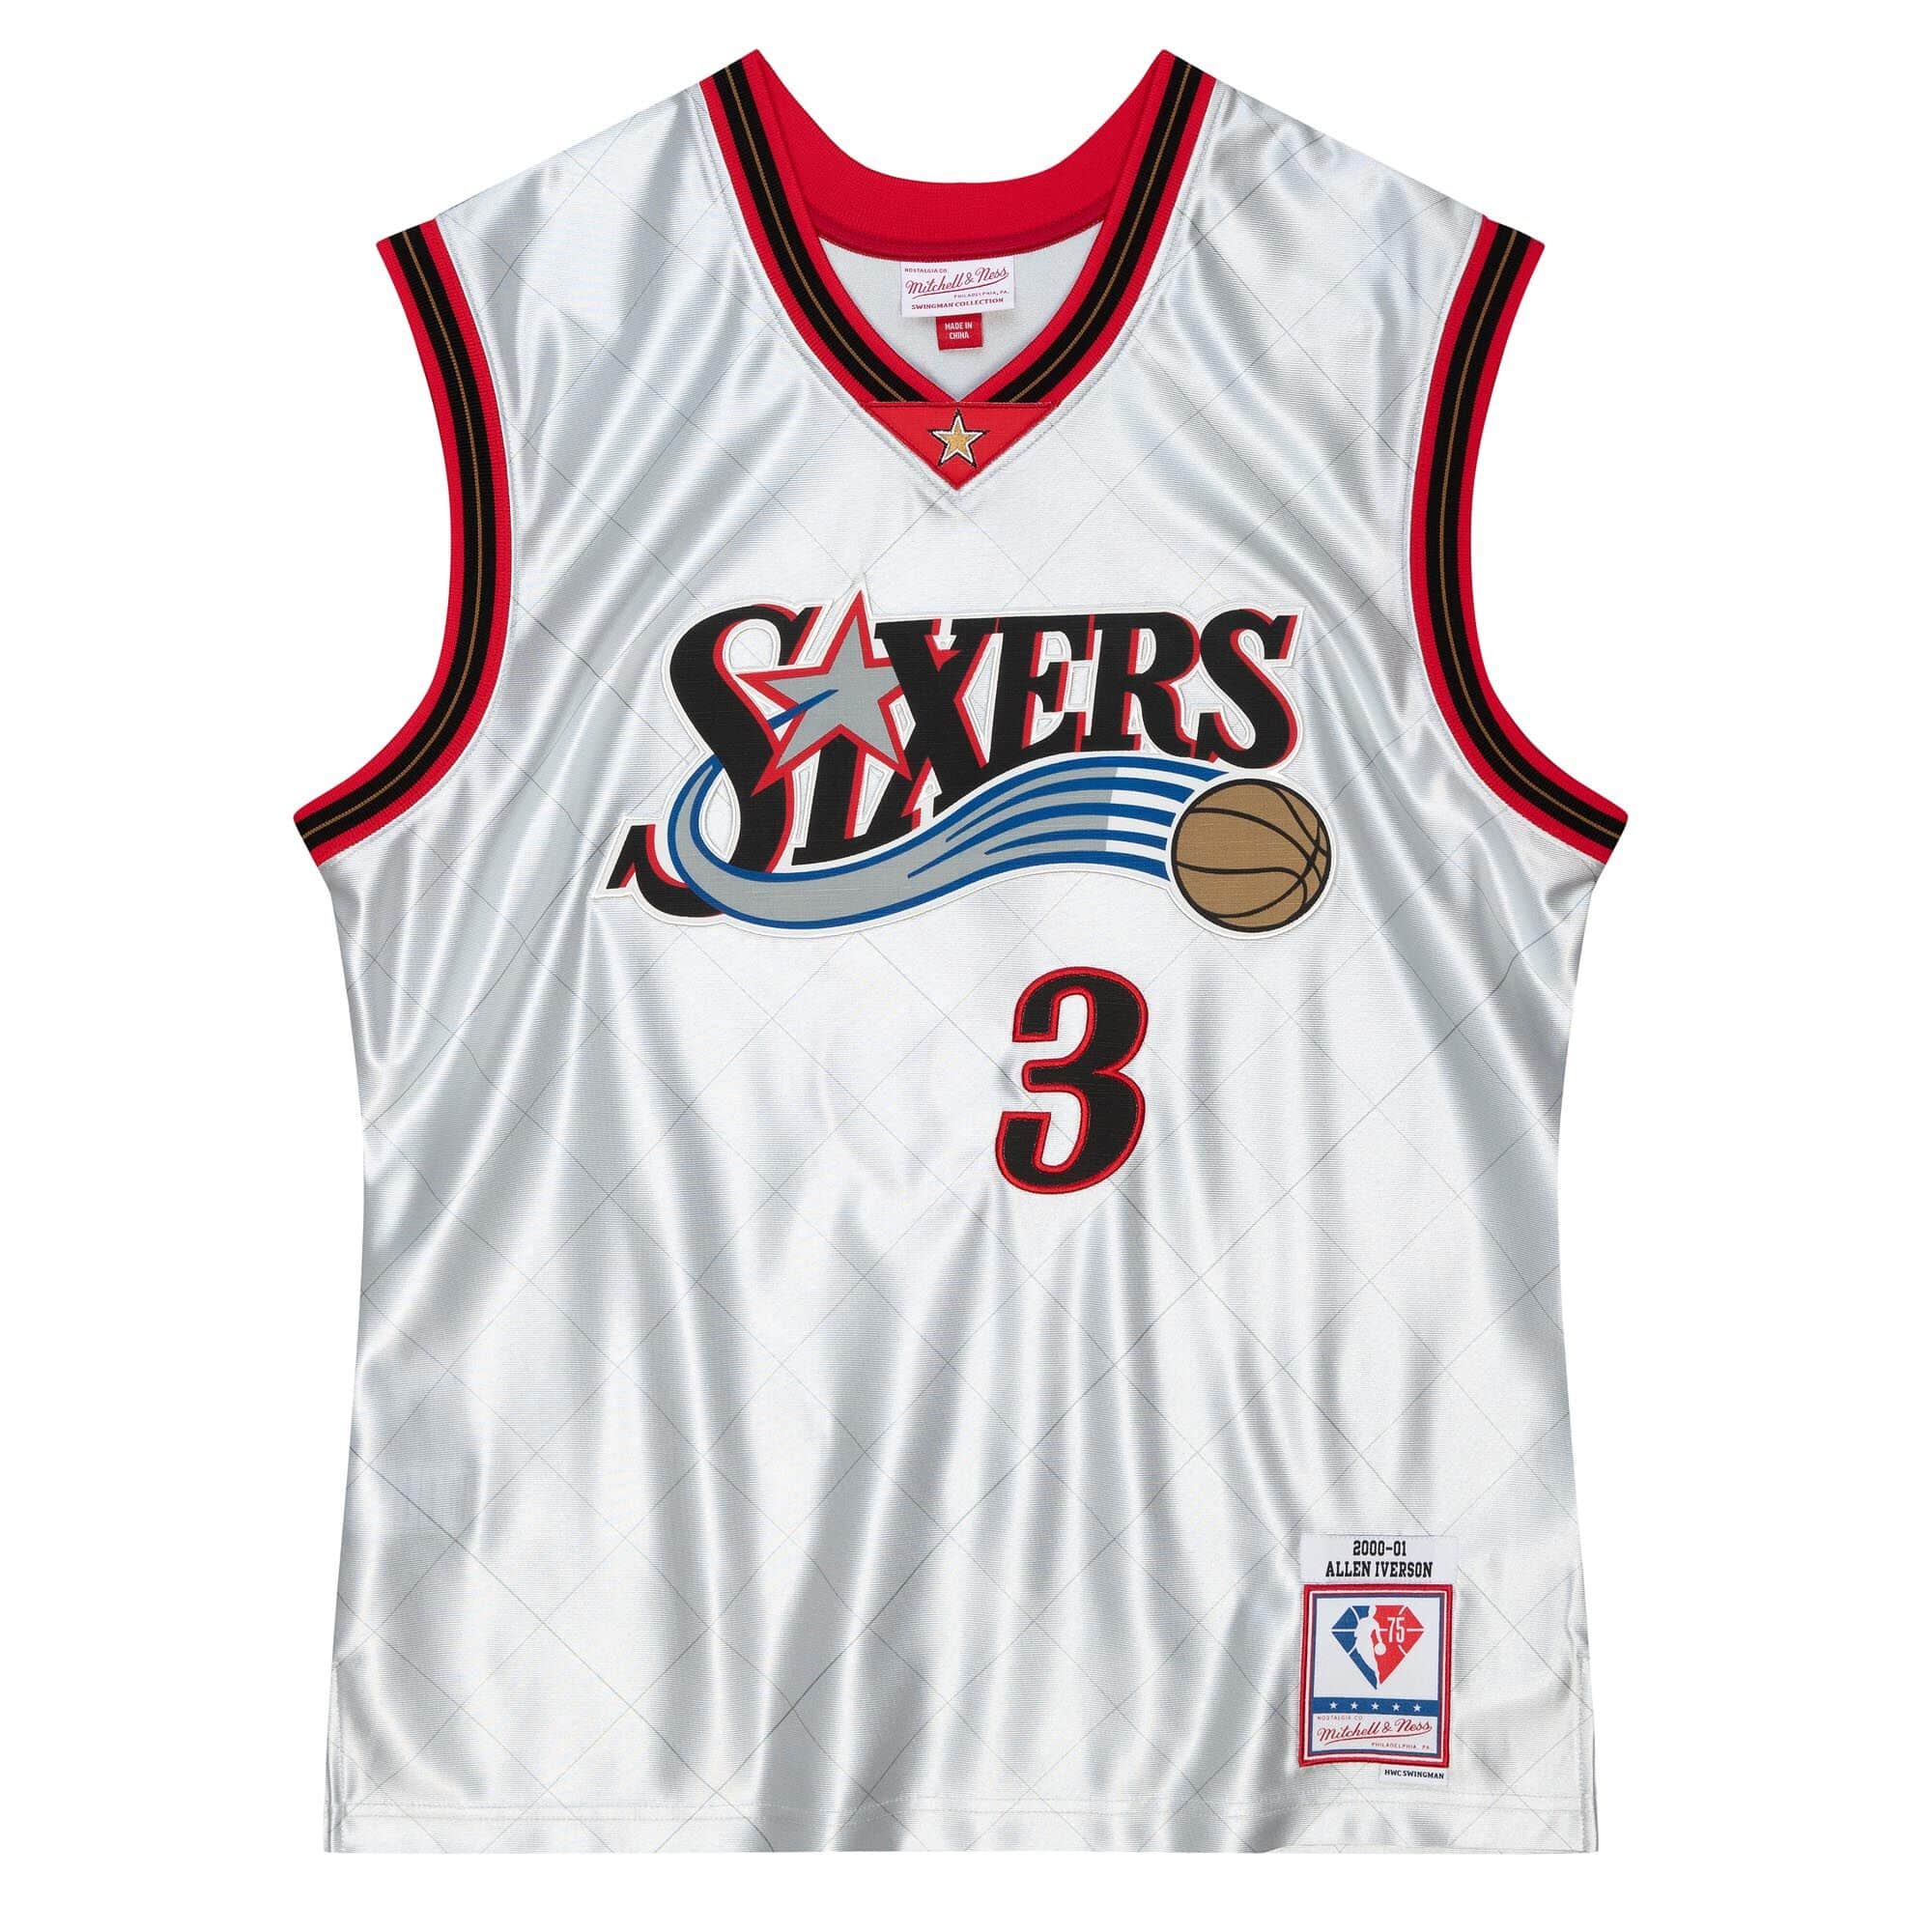 iverson sixers jersey white